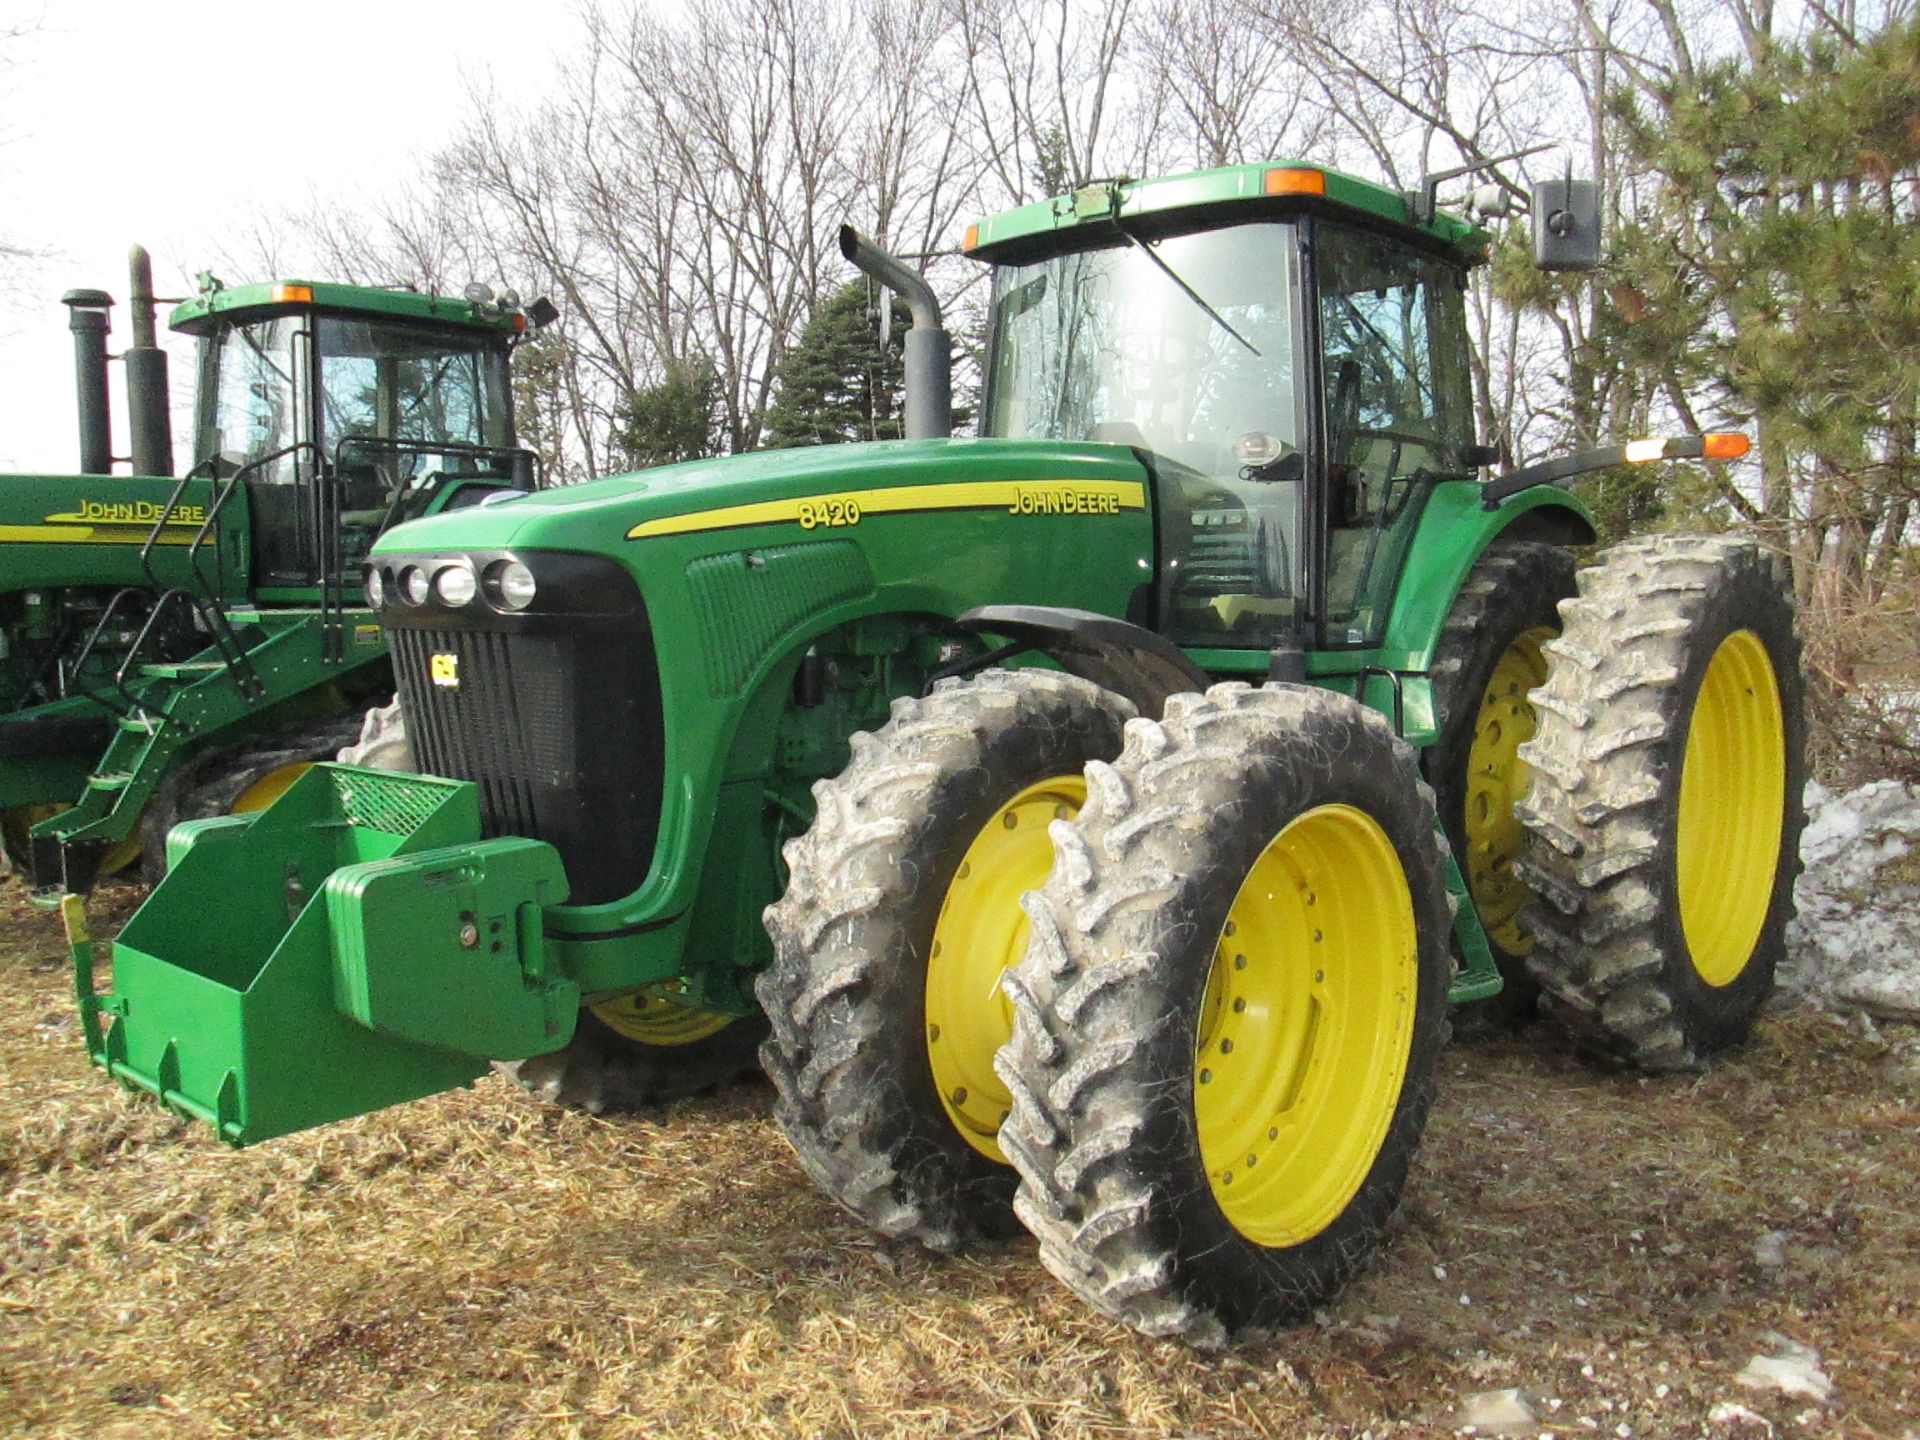 ’02 JD 8420 MFWD,(SN RW8420P007155)P.S.,FRONT SUSPENSION,GREENSTAR READY,480X50 DUALS,4921 HRS.